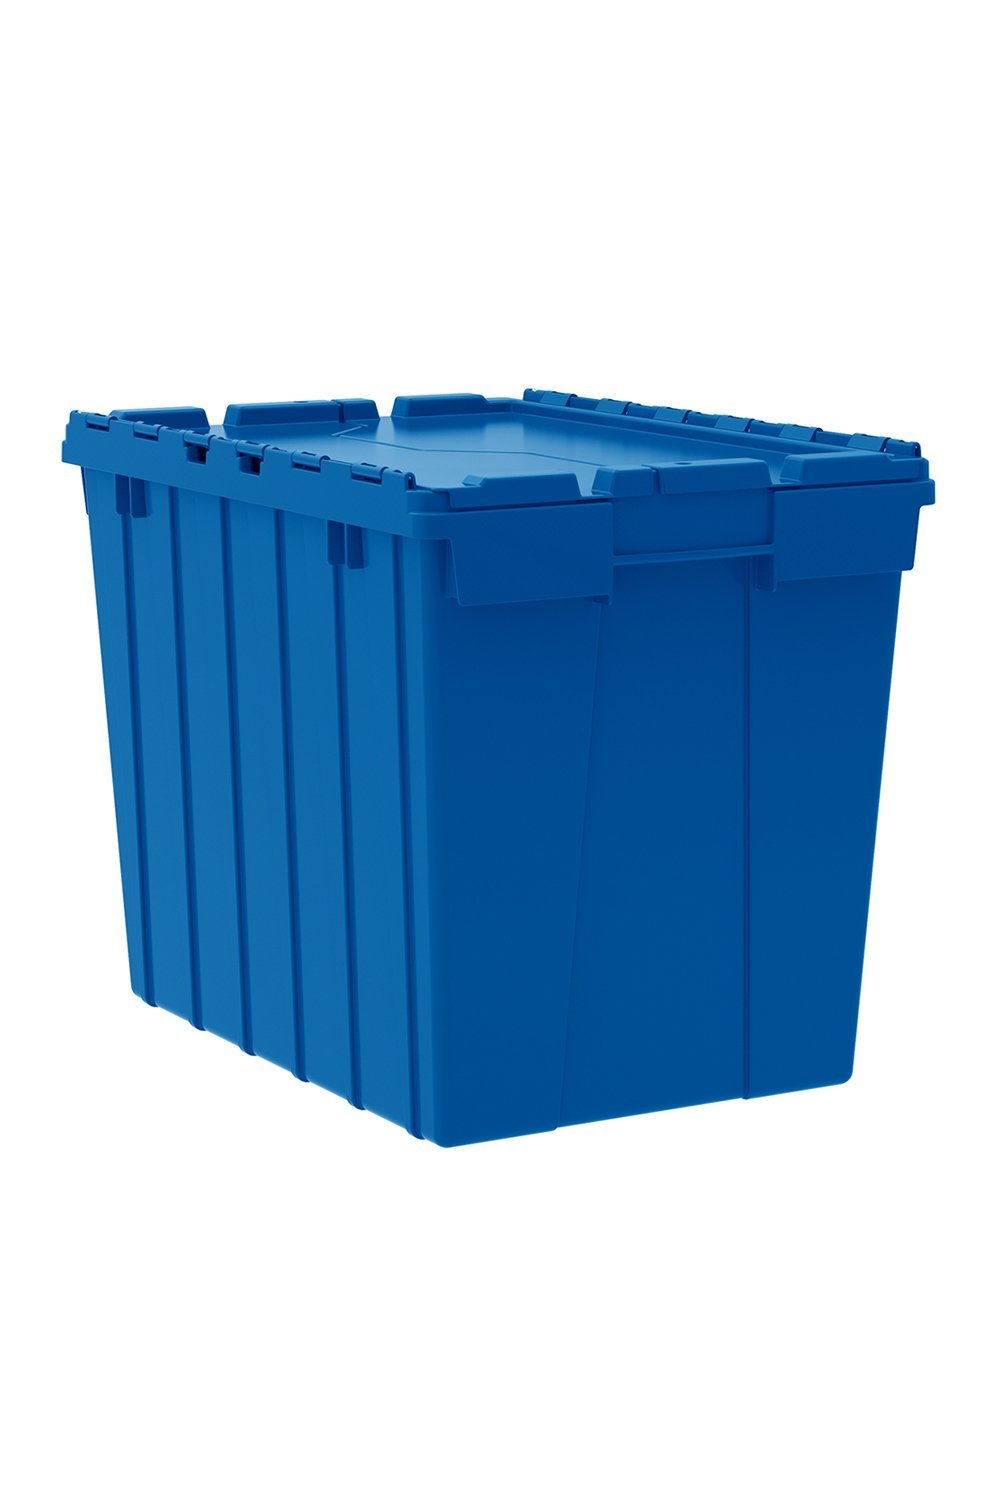 Attached Top Container Bins & Containers Acart 21-1/2"L x 15-1/4"W x 17-1/4"H Blue 